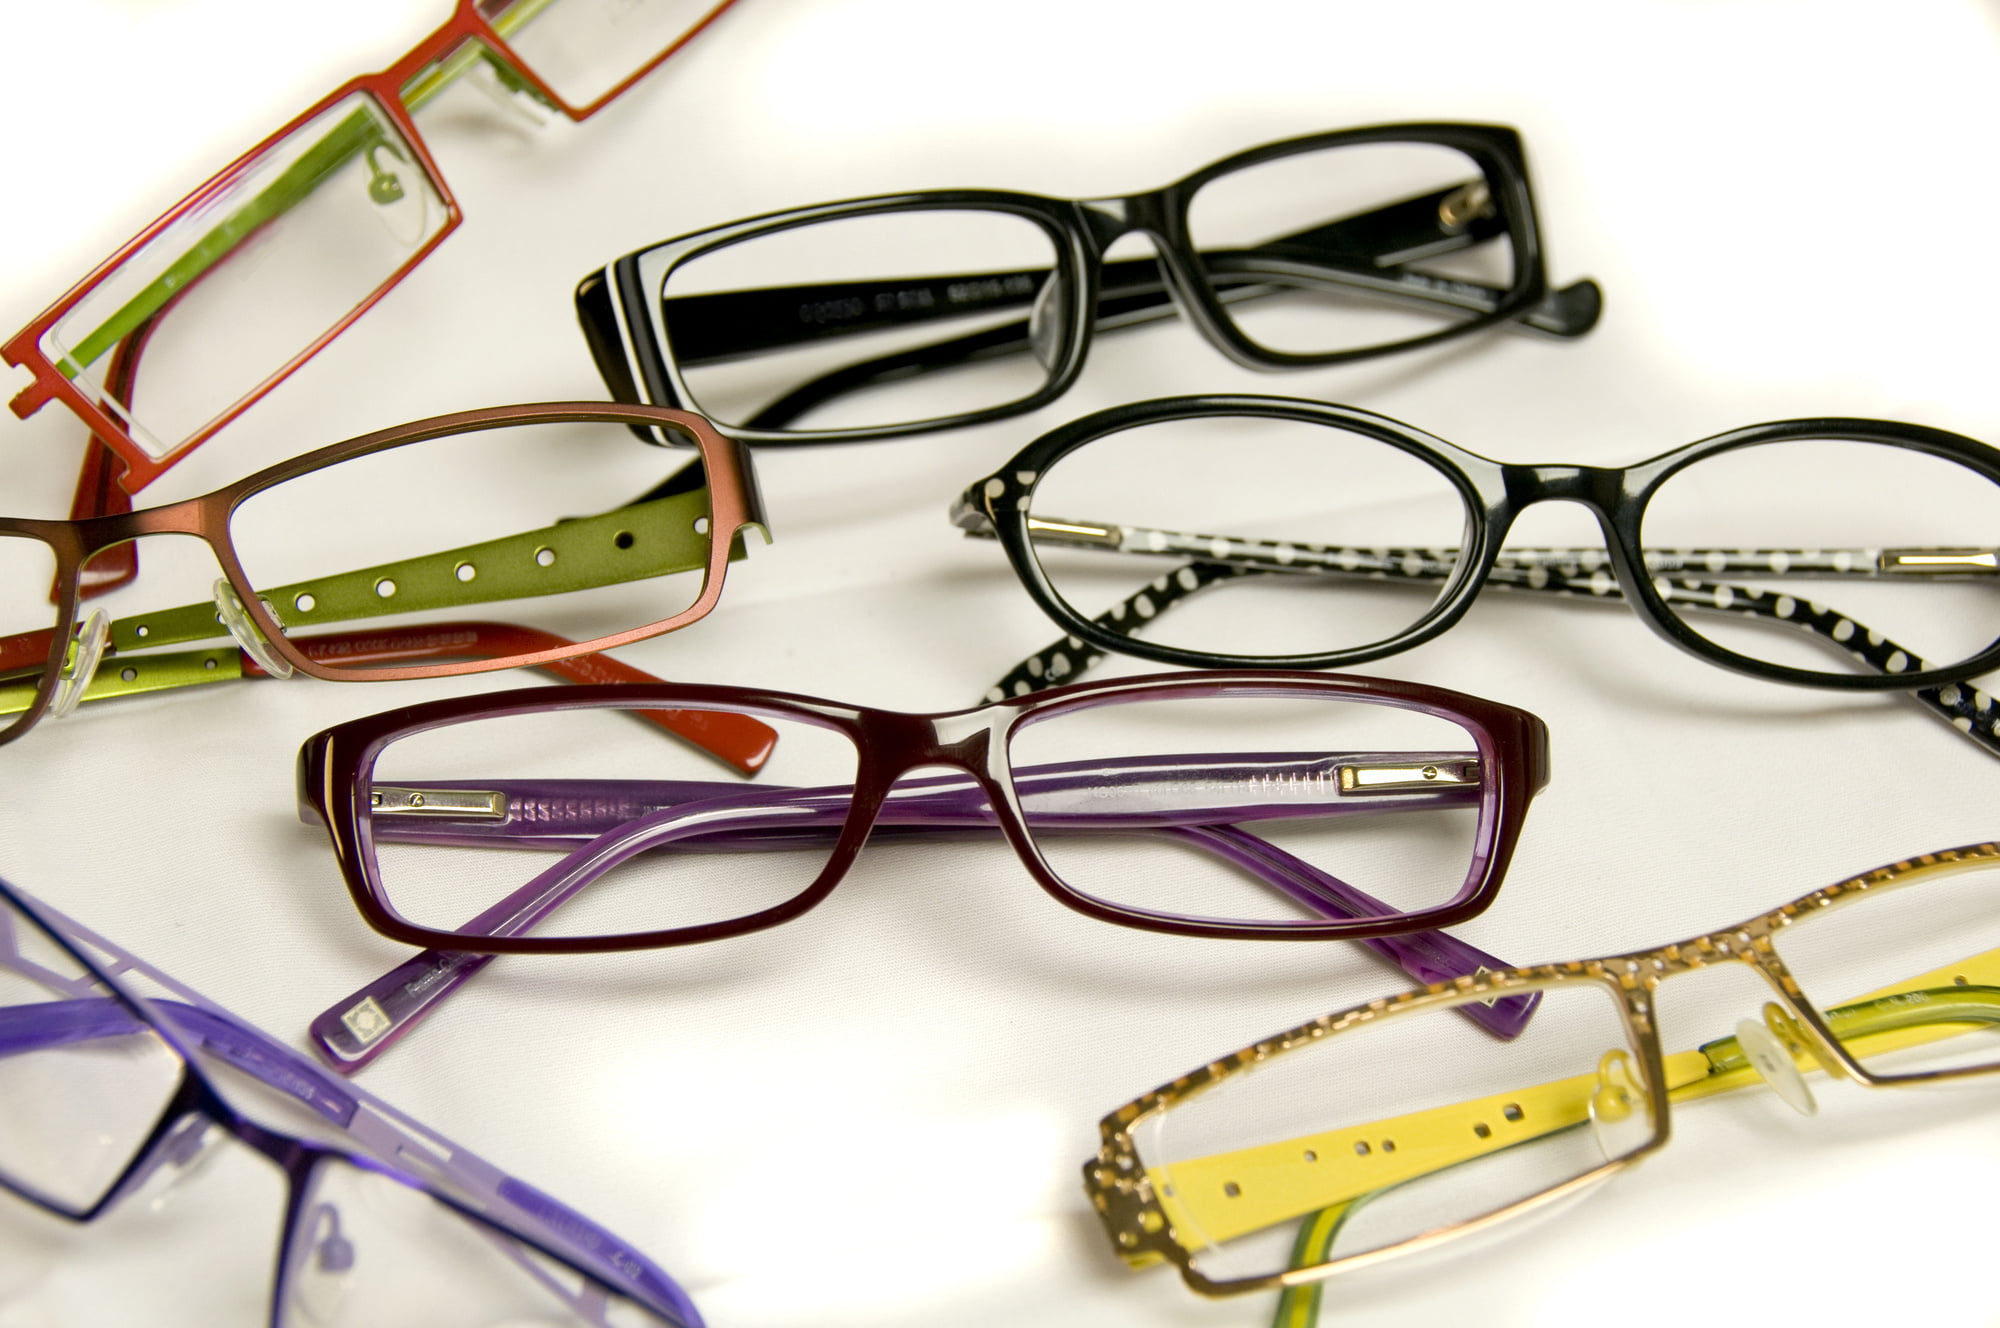 Did you know that not all lenses are created equal these days? Here are the many different types of eyeglass lenses that exist today.